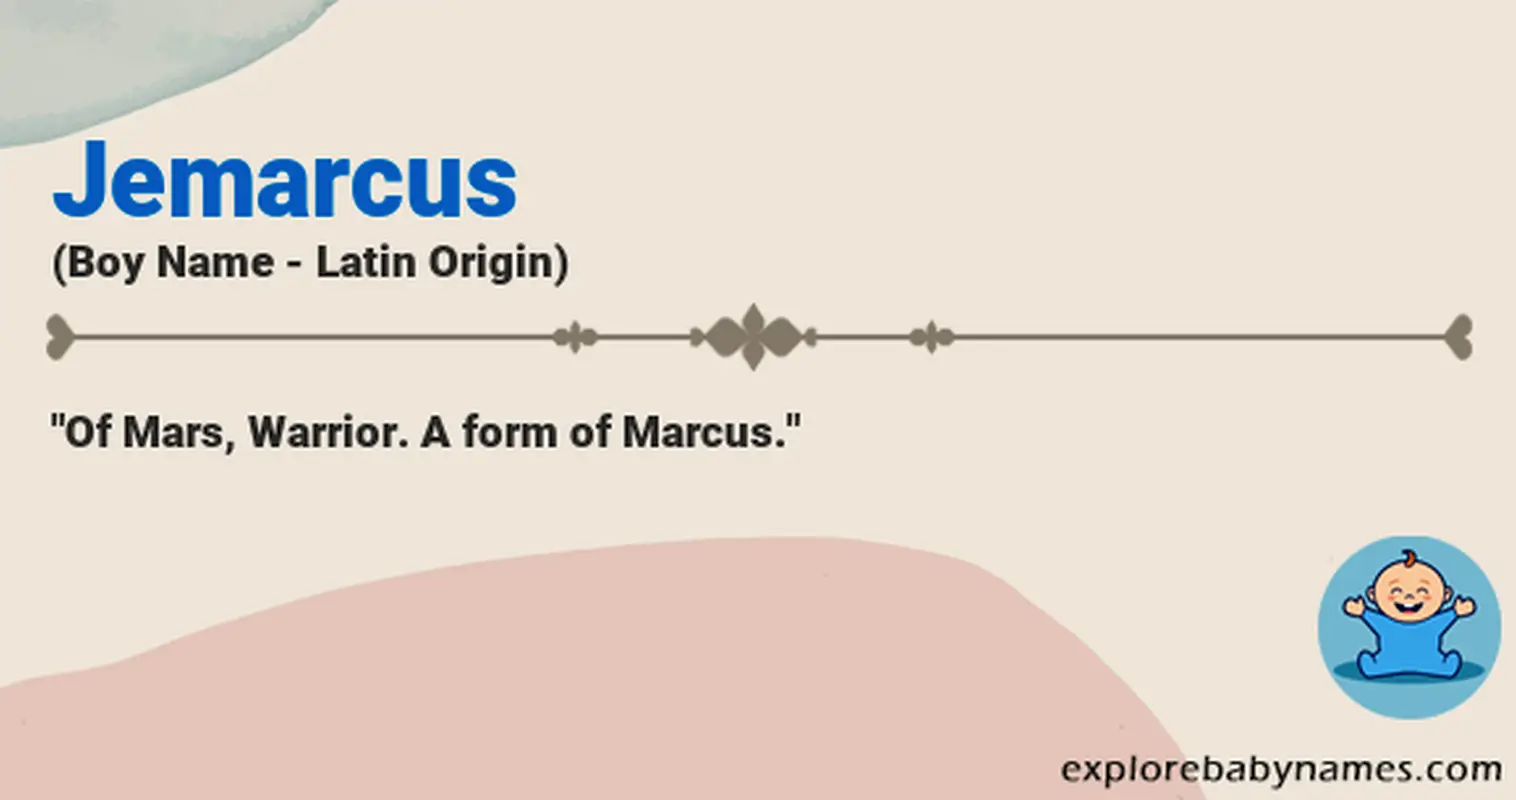 Meaning of Jemarcus